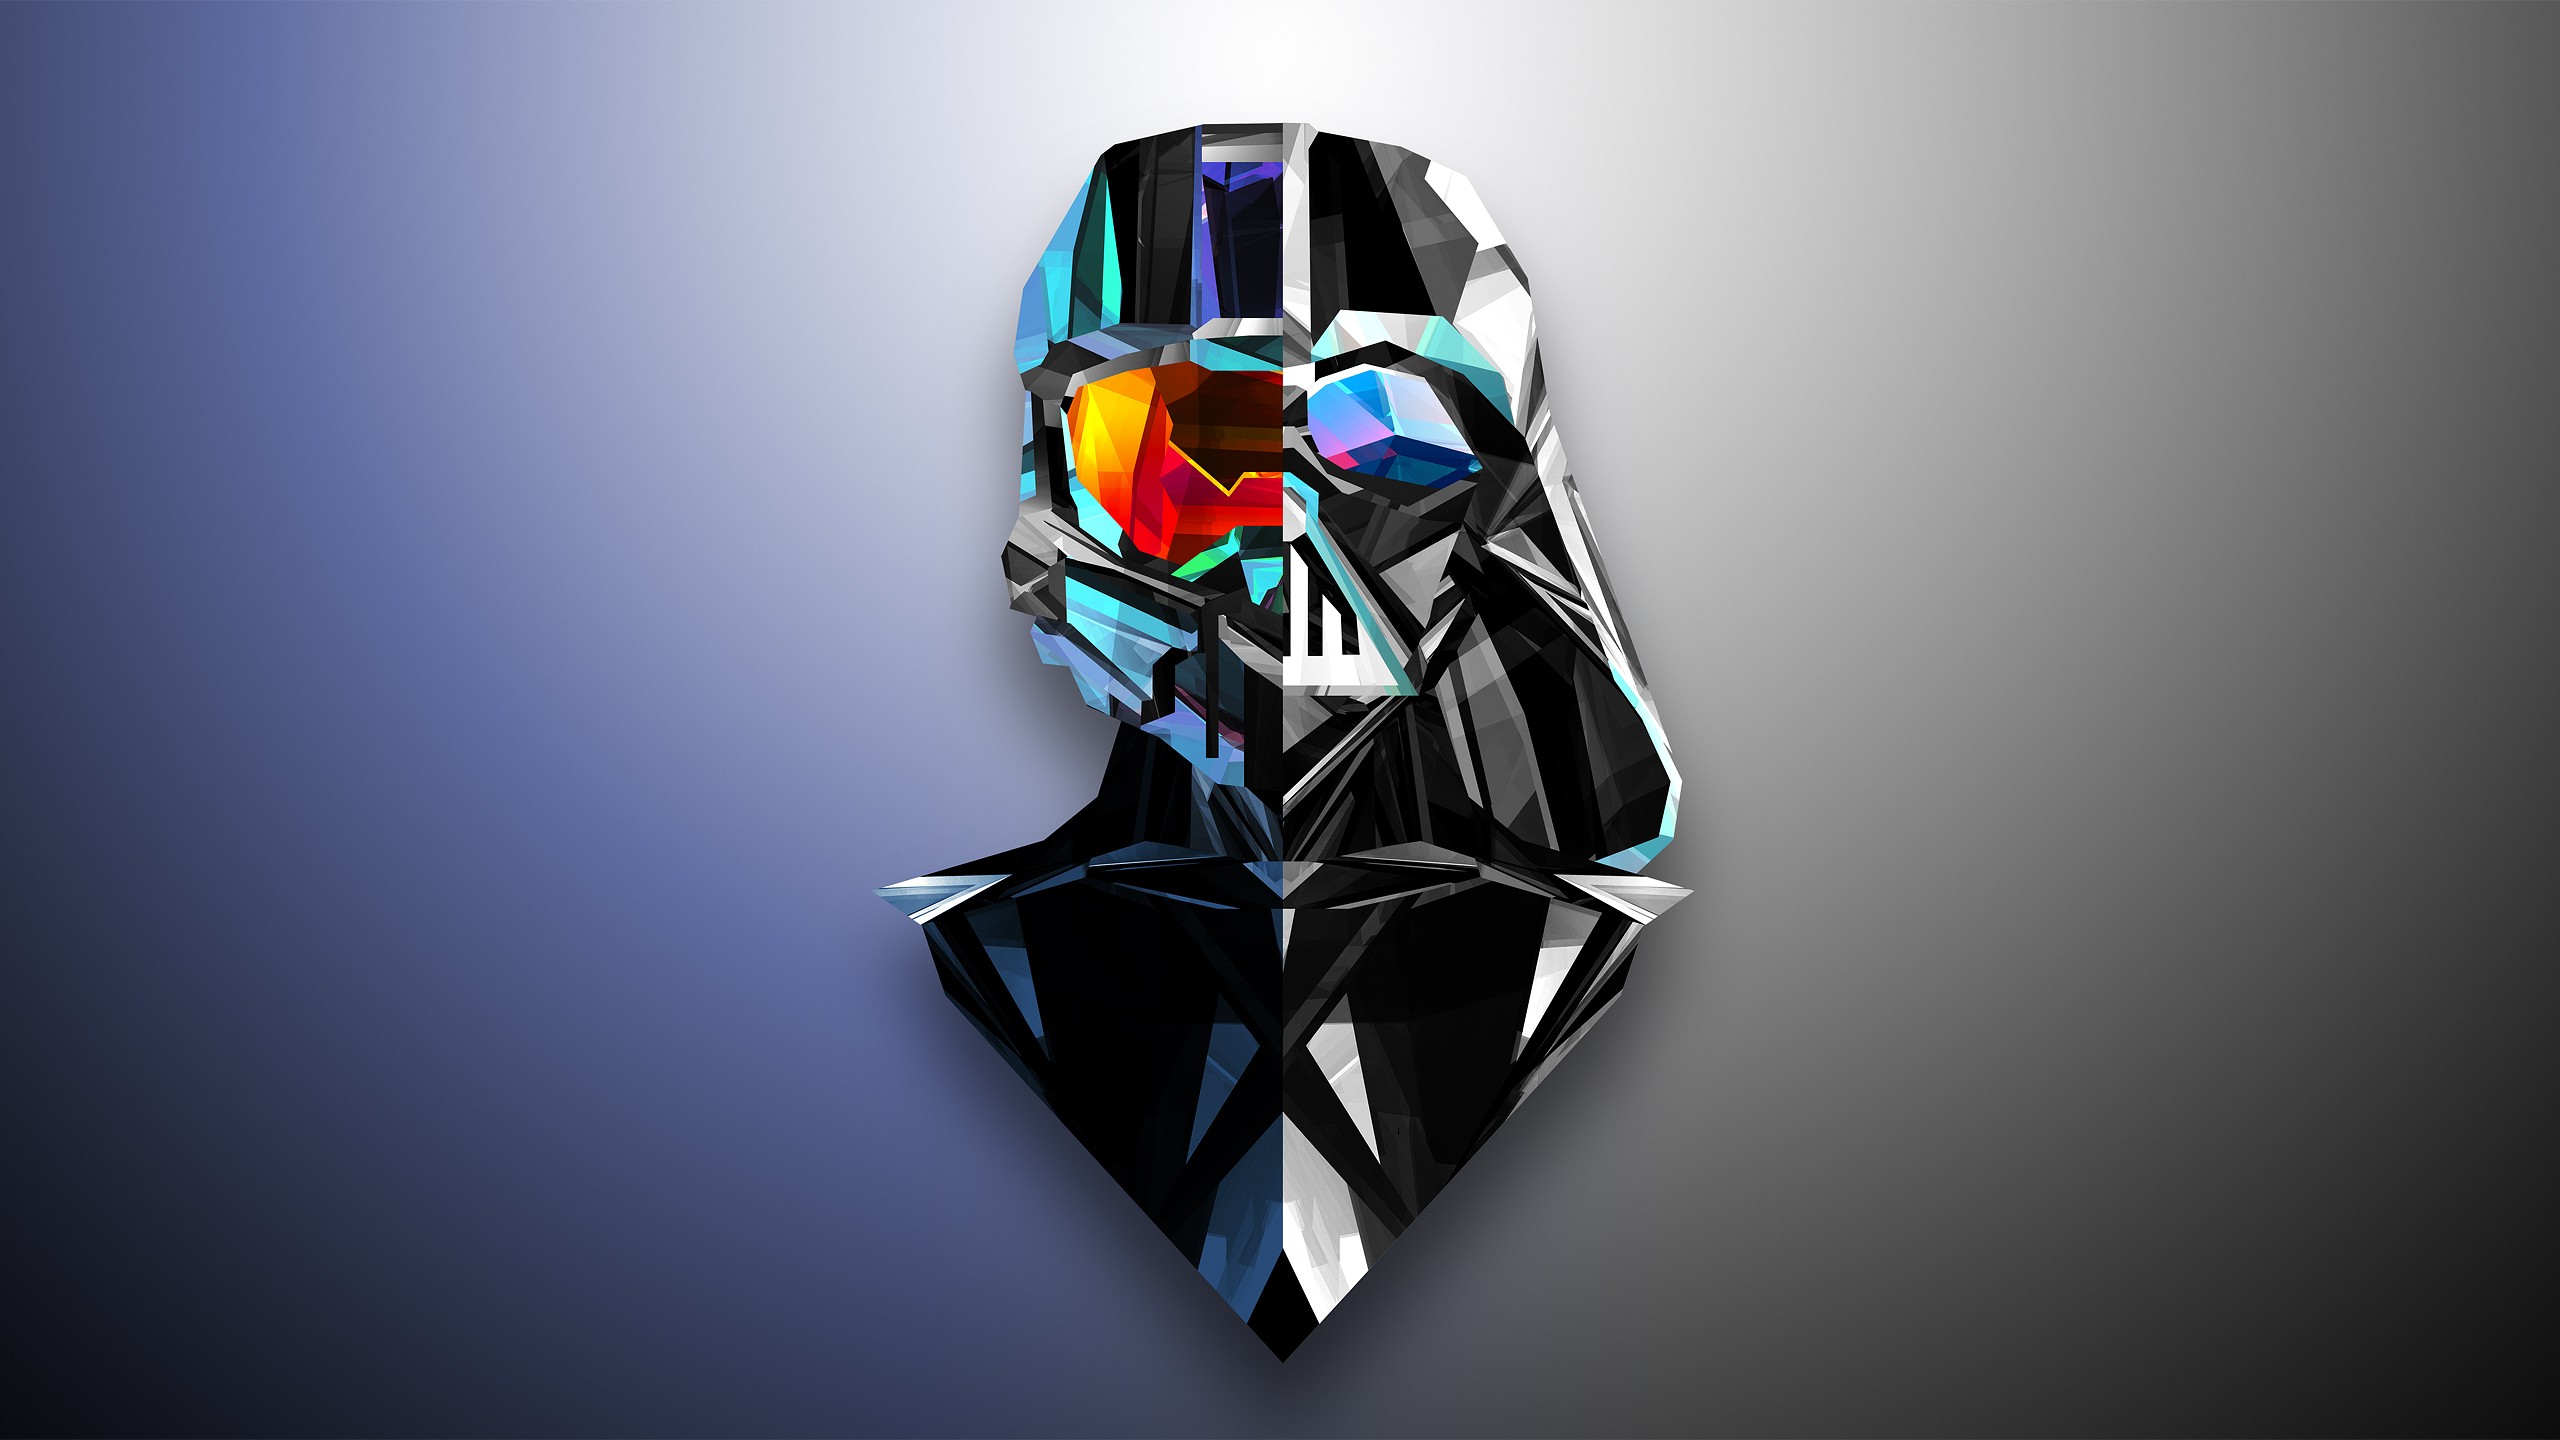 Wallpaper, abstract, low poly, helmet, Halo, Justin Maller, Darth Vader, Master Chief, graphics, 2560x1440 px, computer wallpaper, automotive design, font, personal protective equipment, product design 2560x1440 Wallpaper